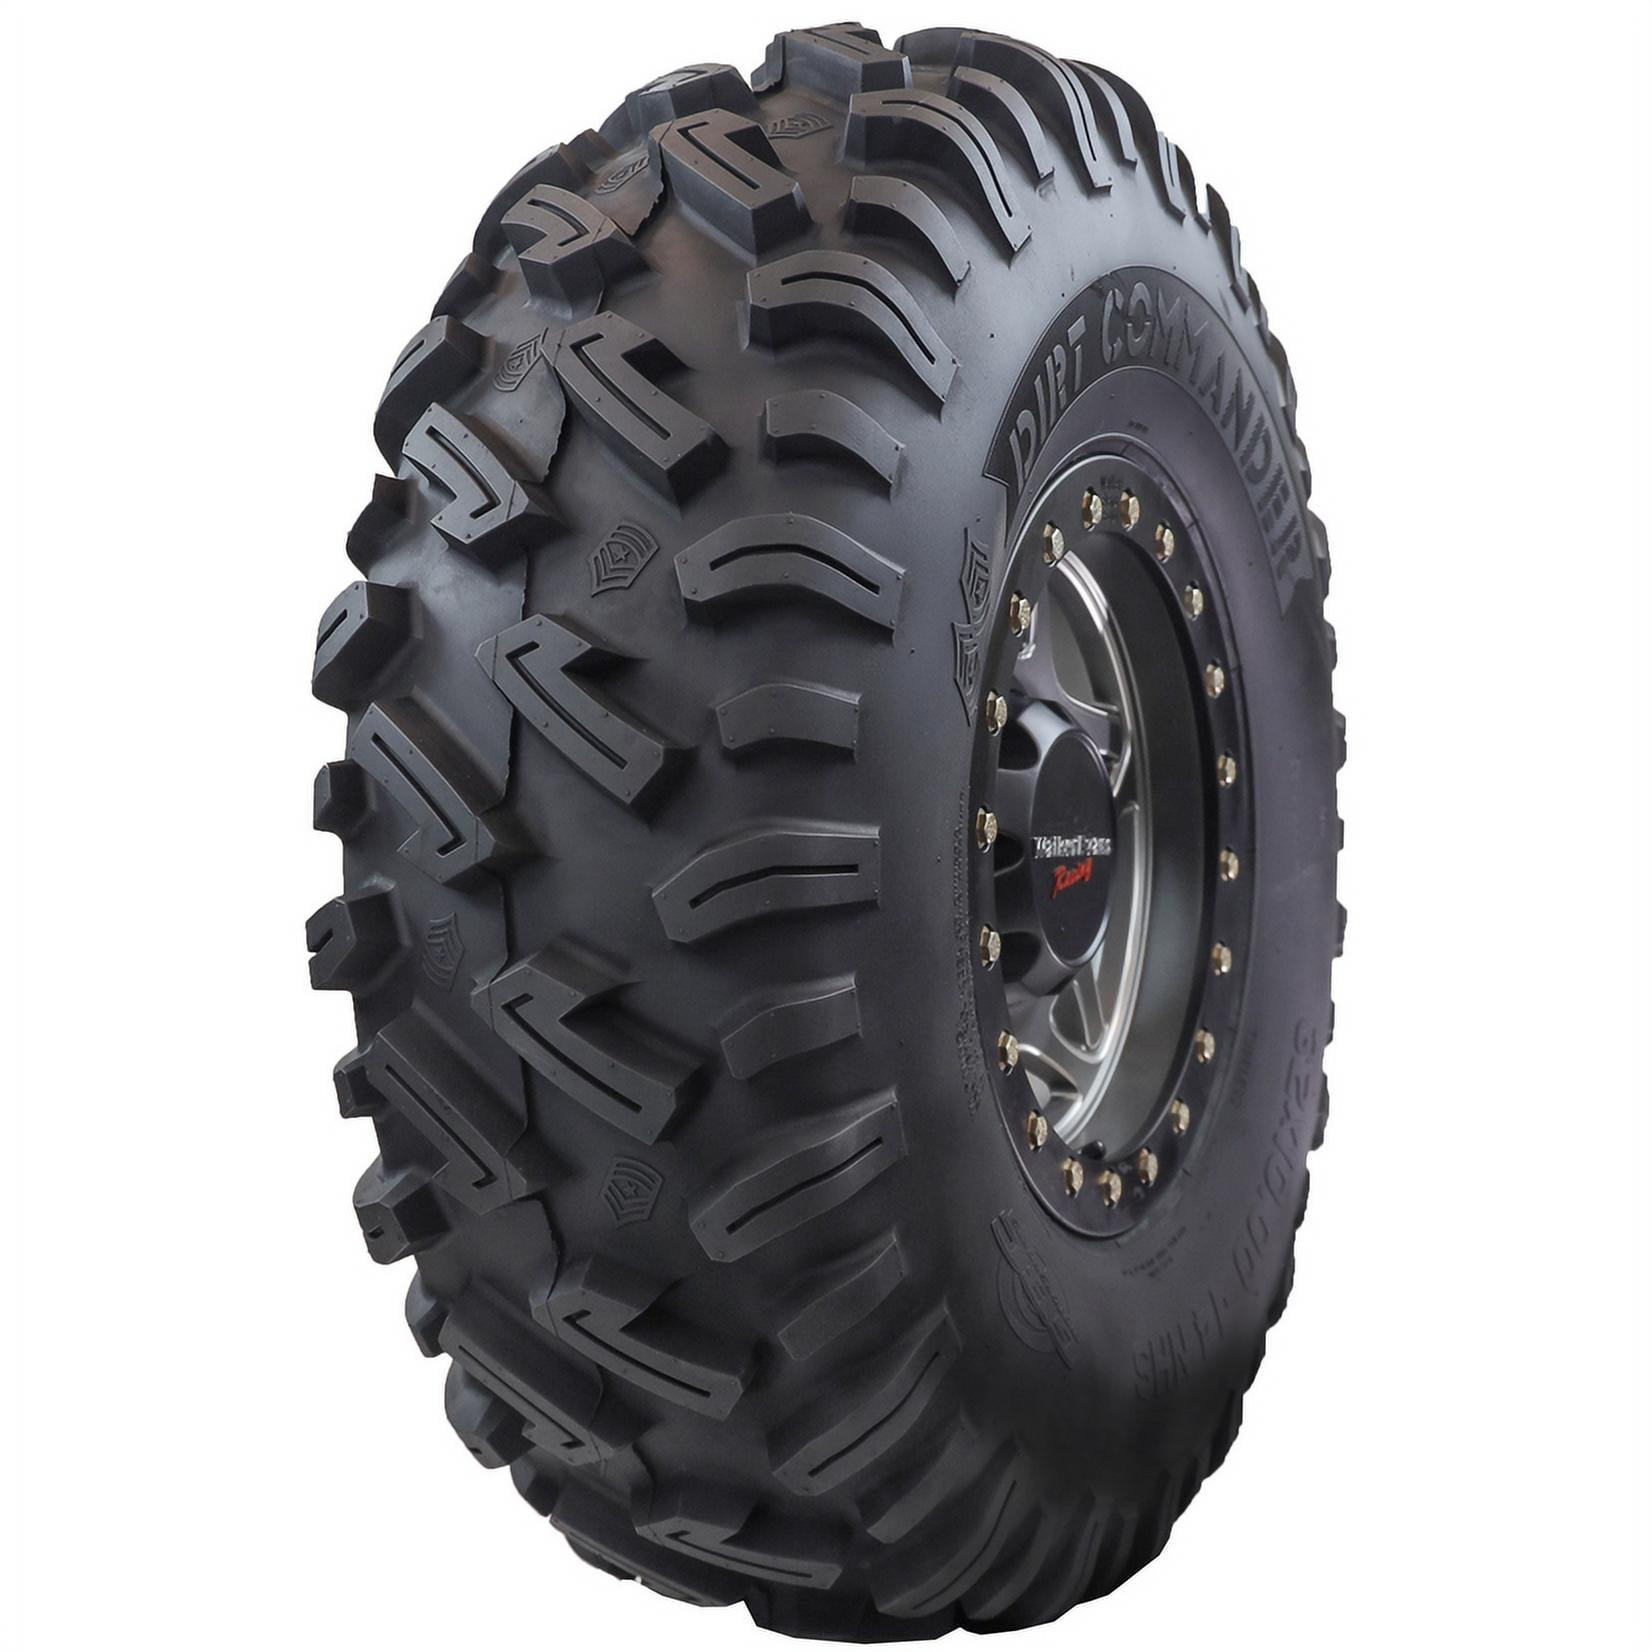 GBC Dirt Commander Tire 30x10-14 for Can-Am Commander 800R DPS